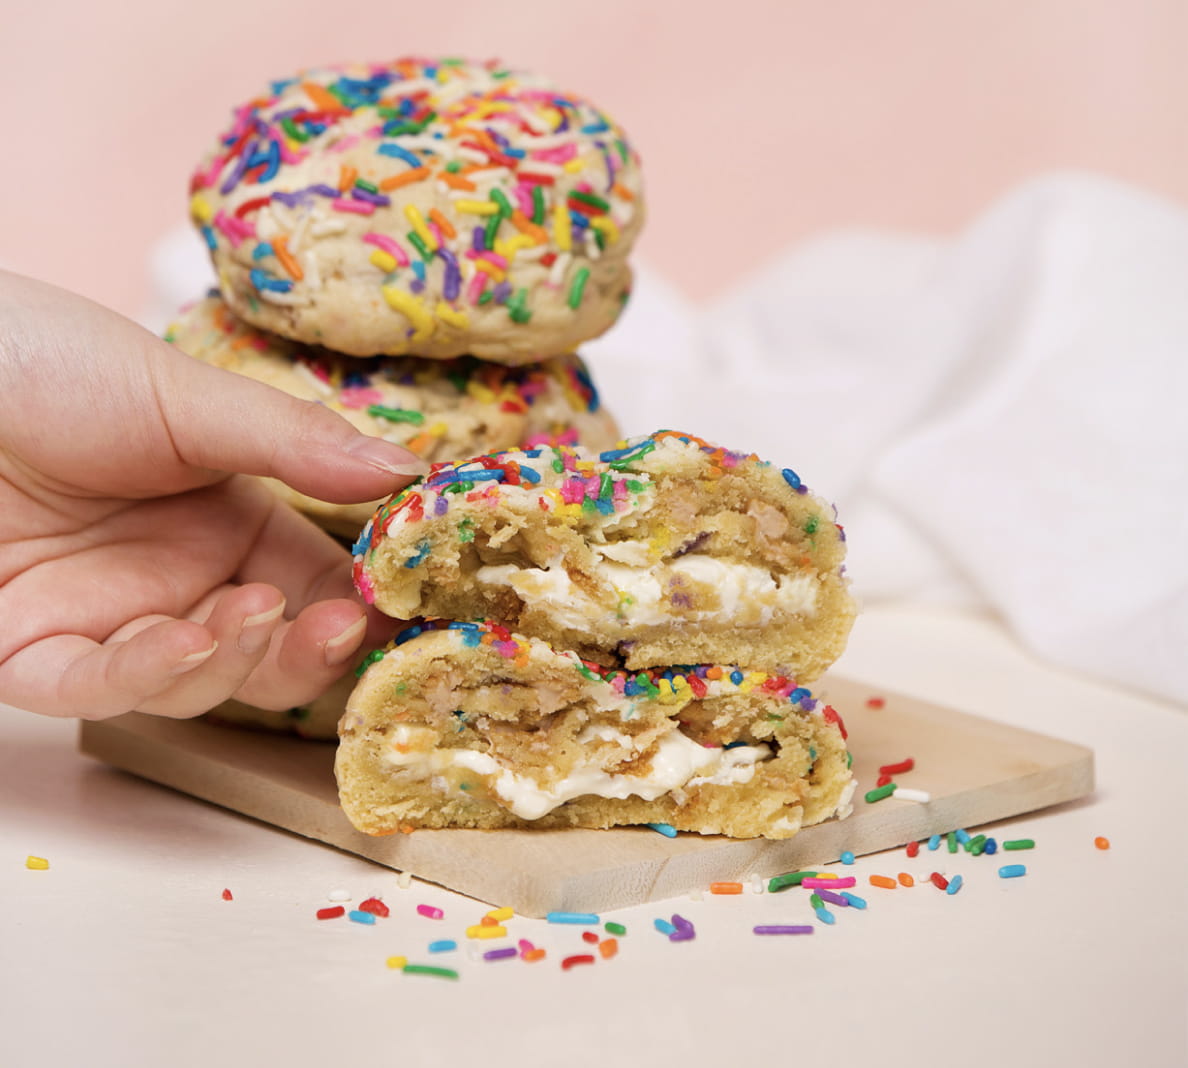 A woman reaches for a half of a YVR stuffed cookie that’s coated with rainbow sprinkles.